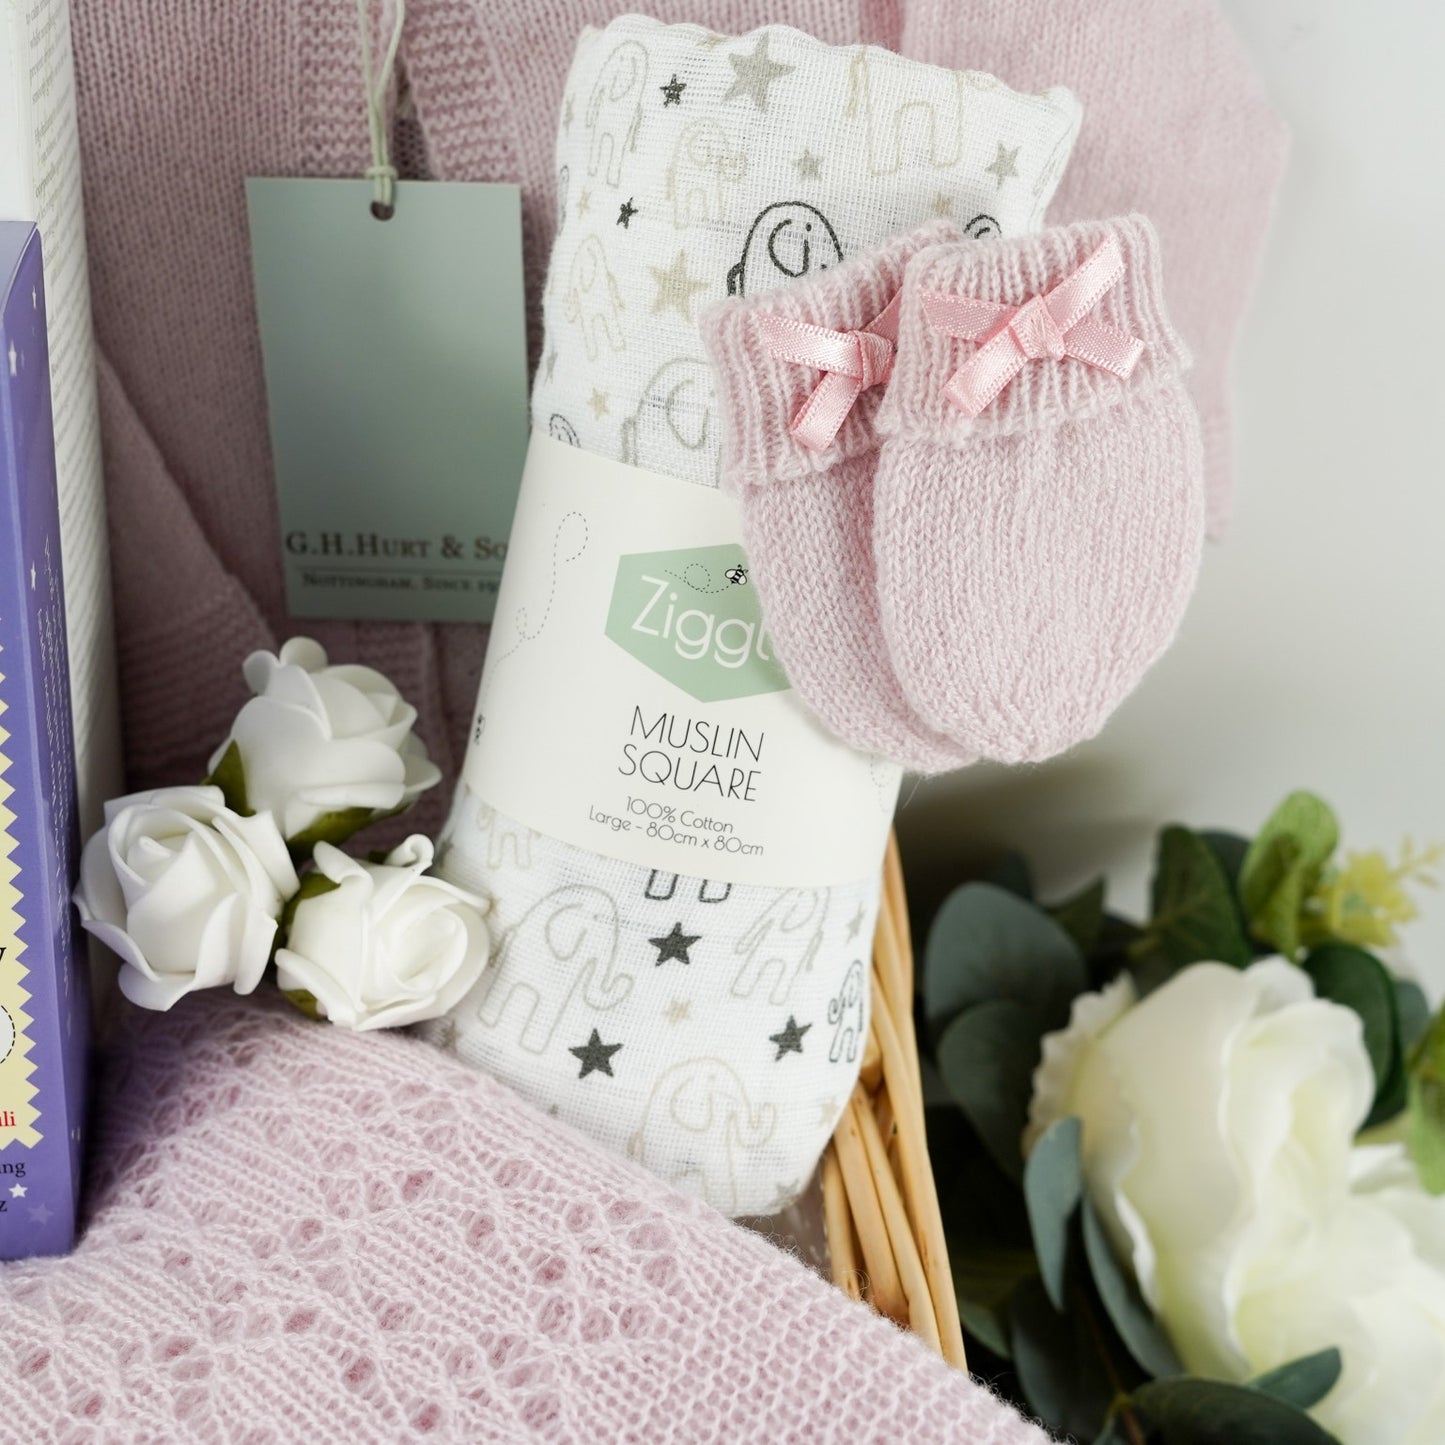 Luxury Cashmere Baby Girl Hamper Basket, Cashmere Baby Receiving Blanket By G H Hurt,  Cashmere Baby Set, Little Butterfly London Baby Toiletries,  Corporate Baby Gift